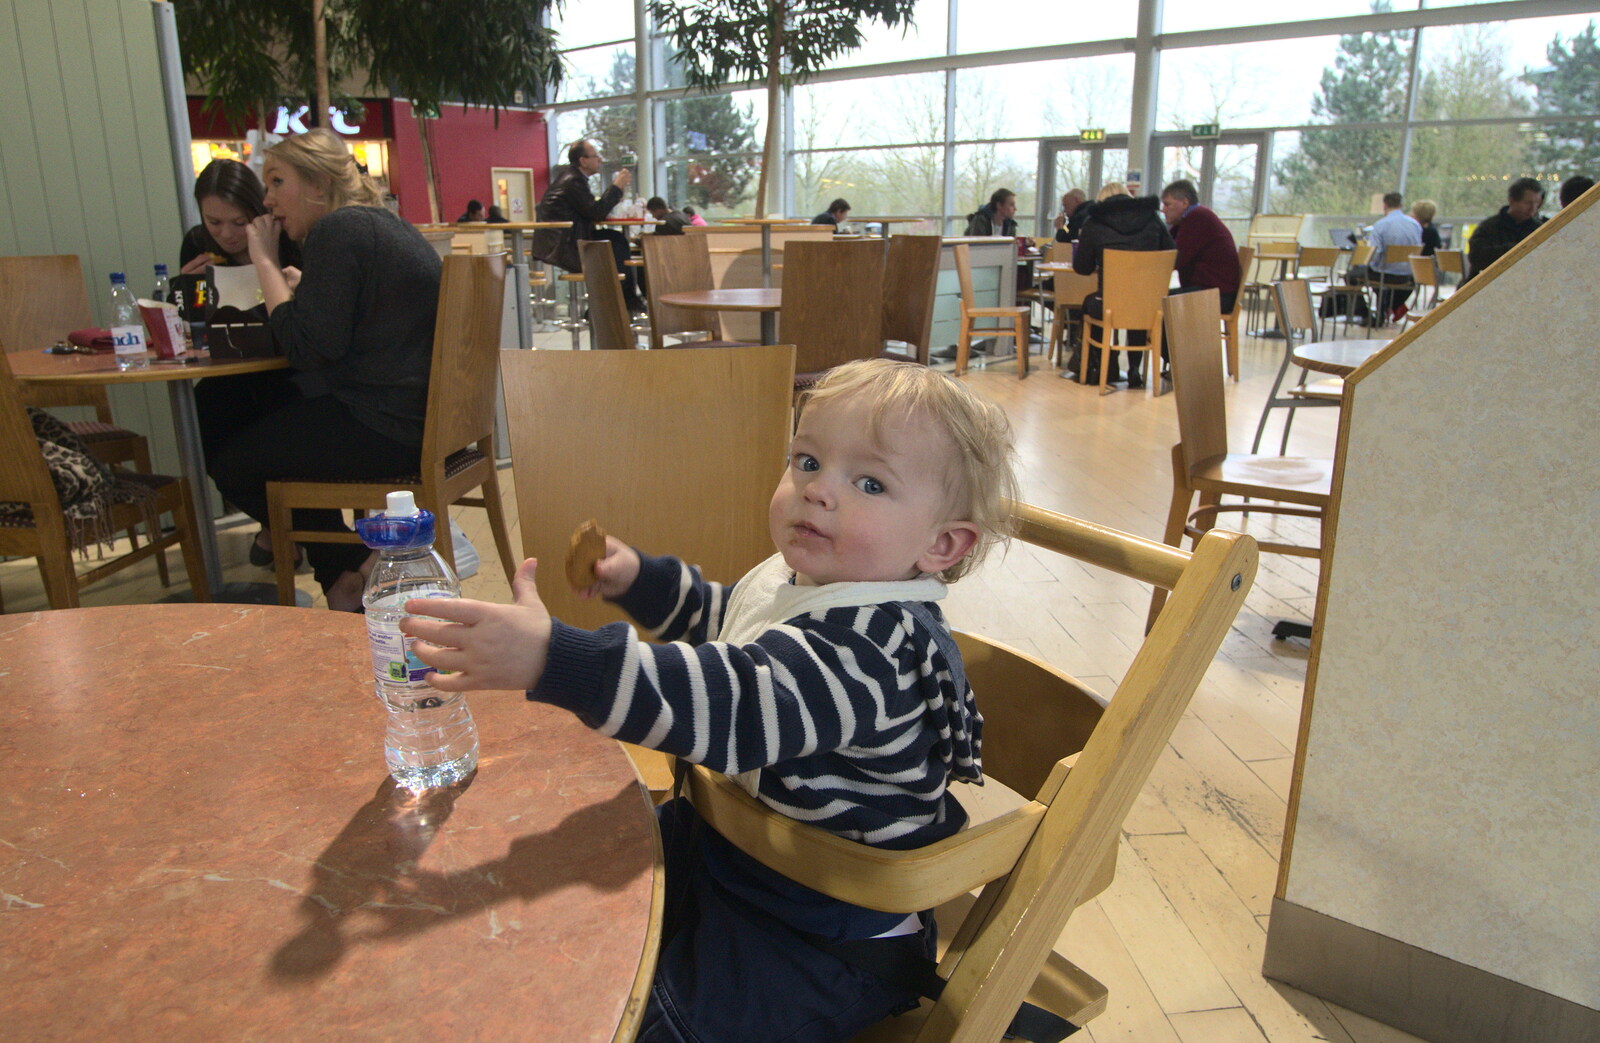 Harry in South Mimms services from The Ornamental Drive, Rhinefield, New Forest - 20th March 2013